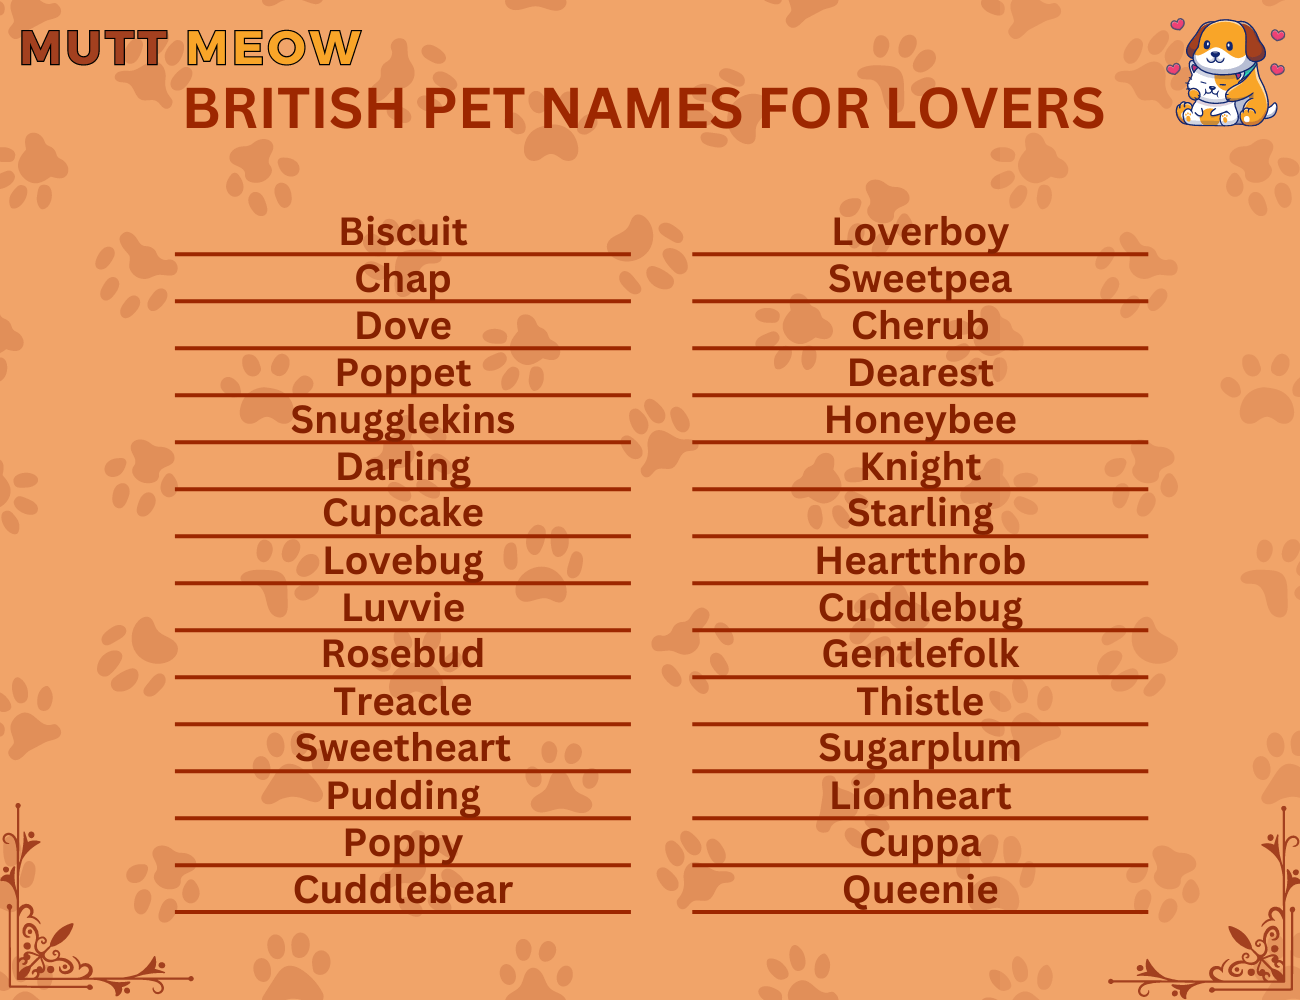 British pet names for lovers